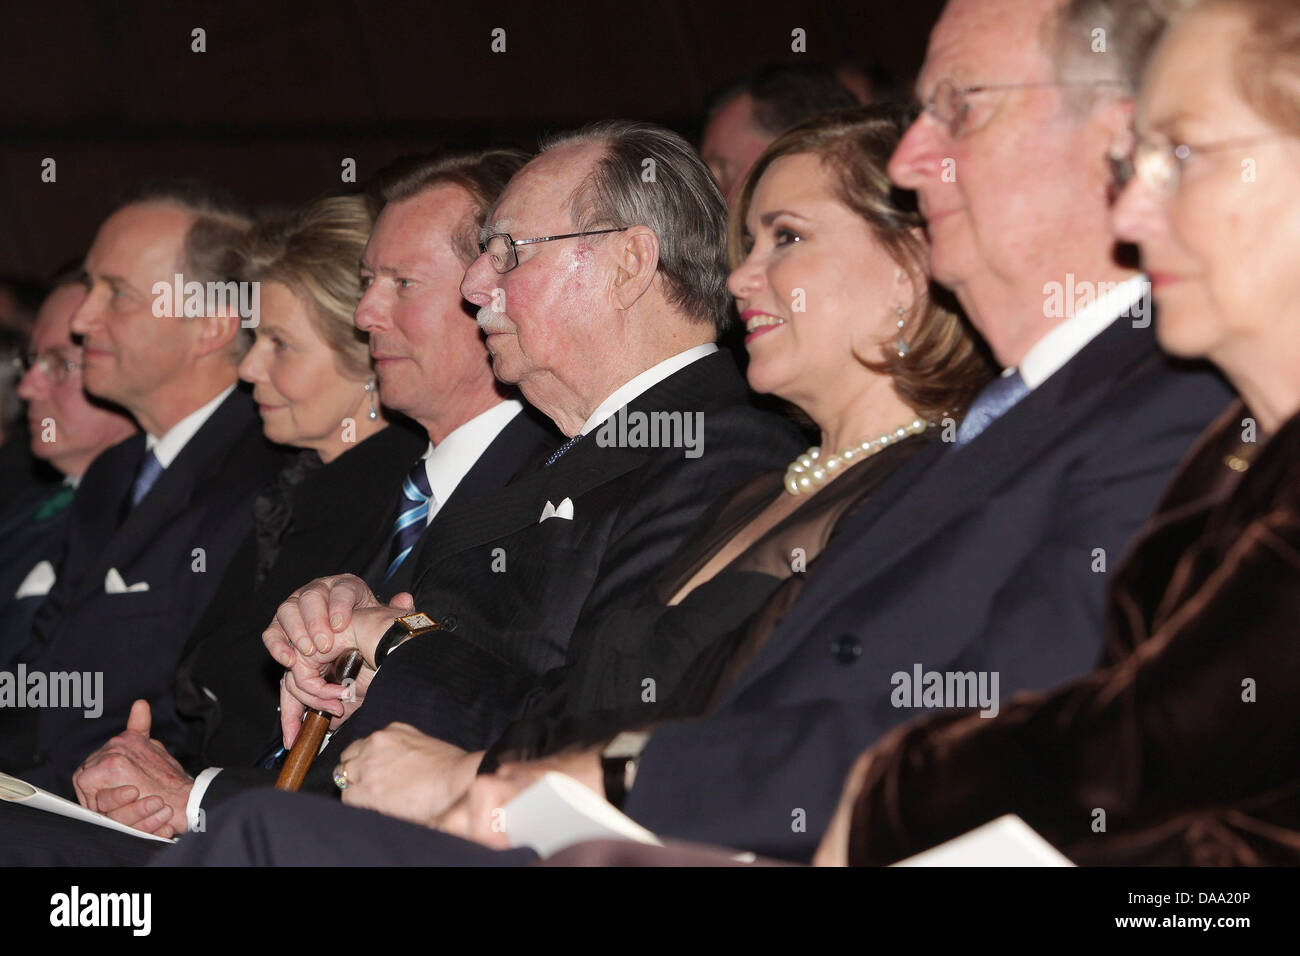 (L-R) Arch Duke Carl Christian of Austria, his wife Princess Marie-Astrid, Grand Duke Henri, Grand Duke Jean, Grand Duchess Maria Teresa, King Albert II. and Queen Paola of Belgium attend the celebrations of Duke Jean's 90th birthday at the Philharmonic Hall in Luxembourg, Luxembourg, 05 January 2011. ATTENTION - Mandatory credit: SIP/Luc Deflorenne Stock Photo